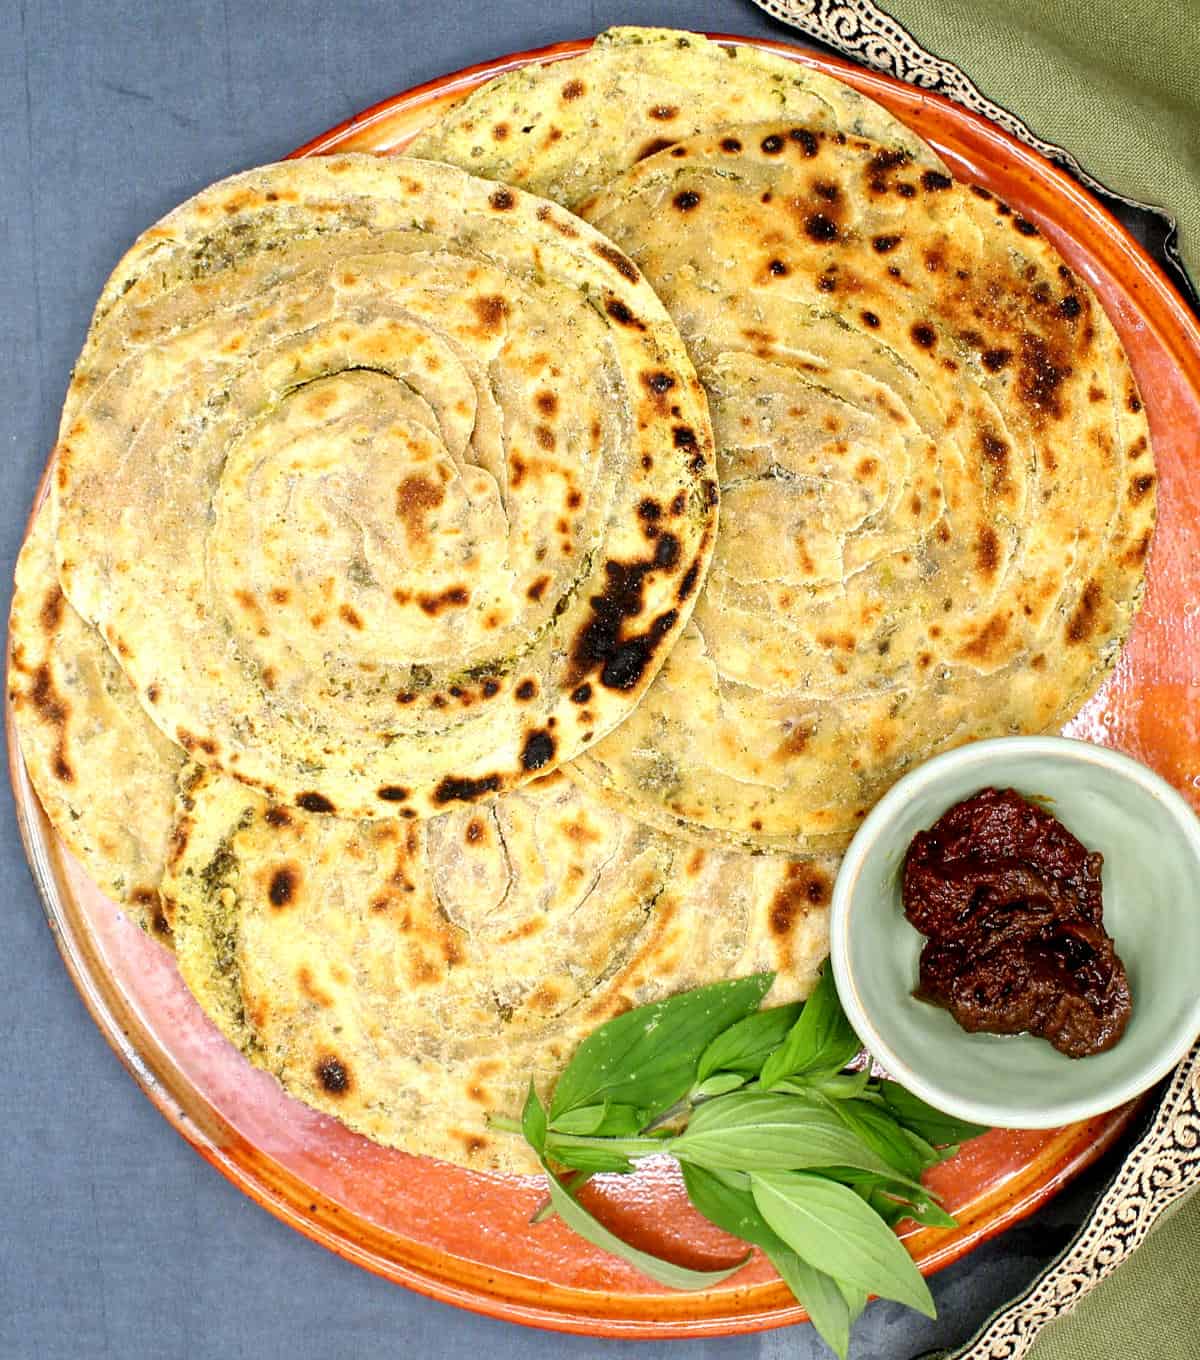 Pudina paratha on an earthen plate with pickles and mint leaves.